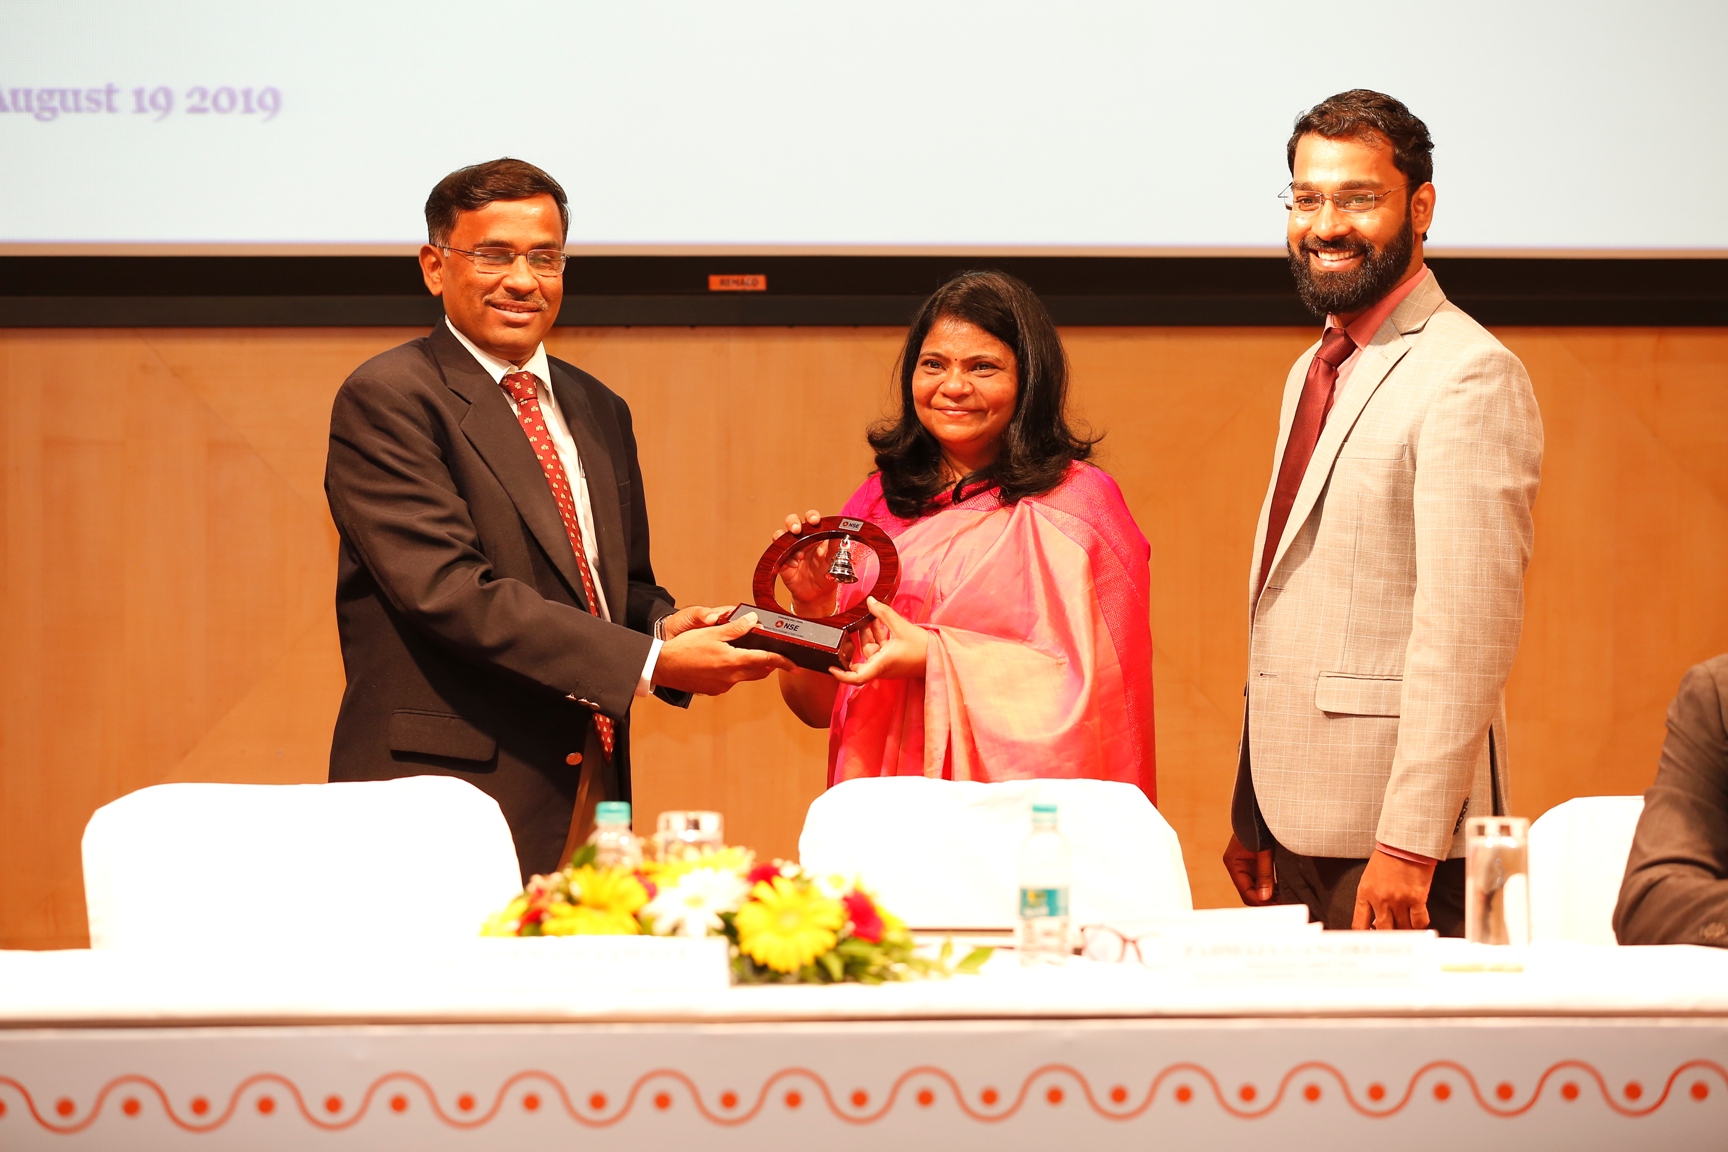 (L-R): Mr. Vikram Limaye (CEO and MD, NSE) presenting the memento to Ms. Padmaja Gangireddy (Managing Director, Spandana Sphoorty Financial Limited) in the presence of Mr. Sudhesh Chandrasekar (Chief Financial Officer, Spandana Sphoorty Financial Limited) at the listing ceremony of Spandana Sphoorty Financial Limited held today in Mumbai at NSE.-Photo By GPN